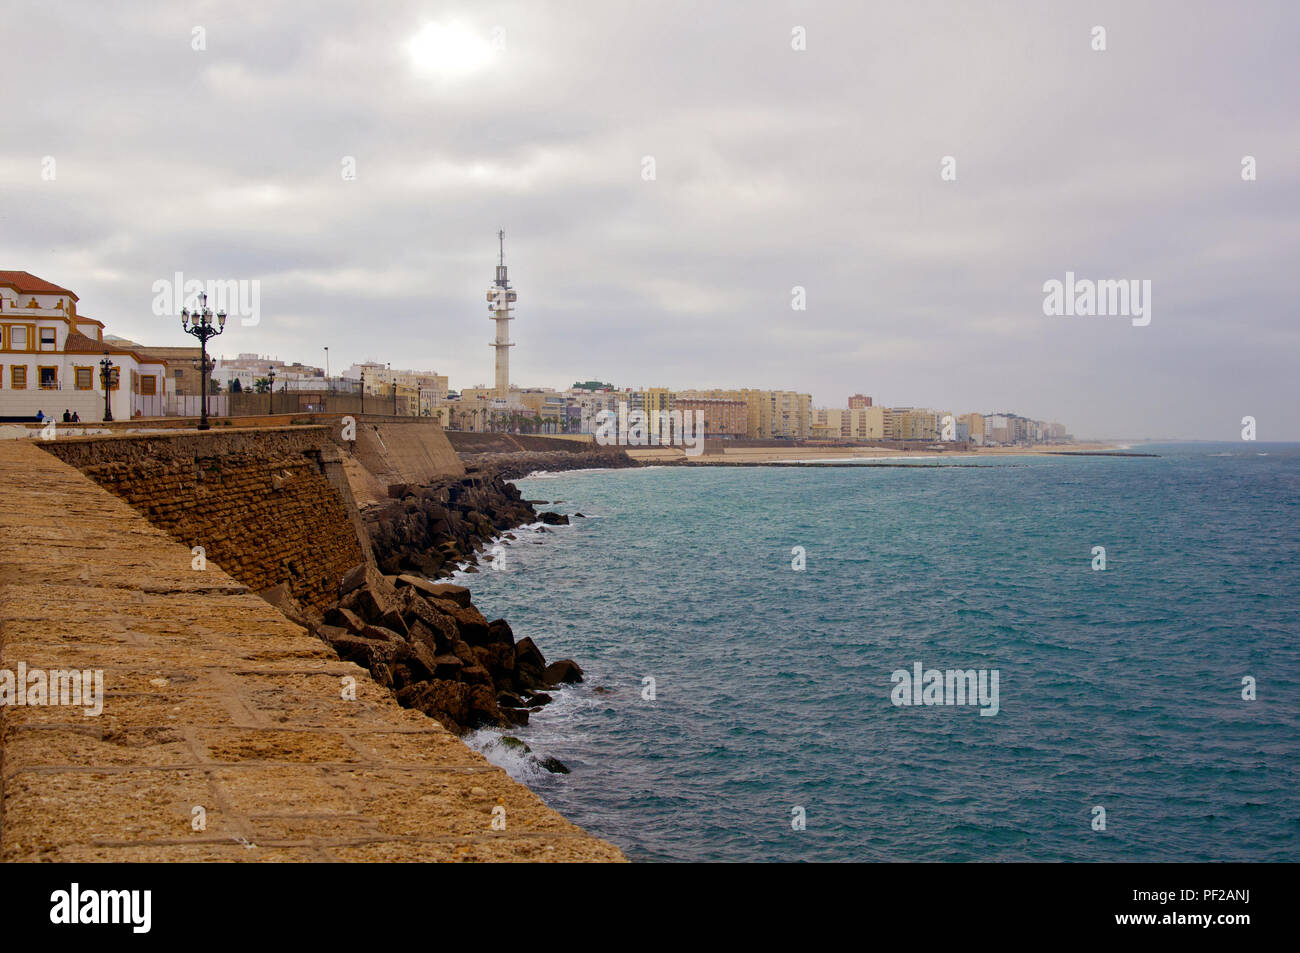 View of boulevard with sea and city, Cadiz, Spain Stock Photo